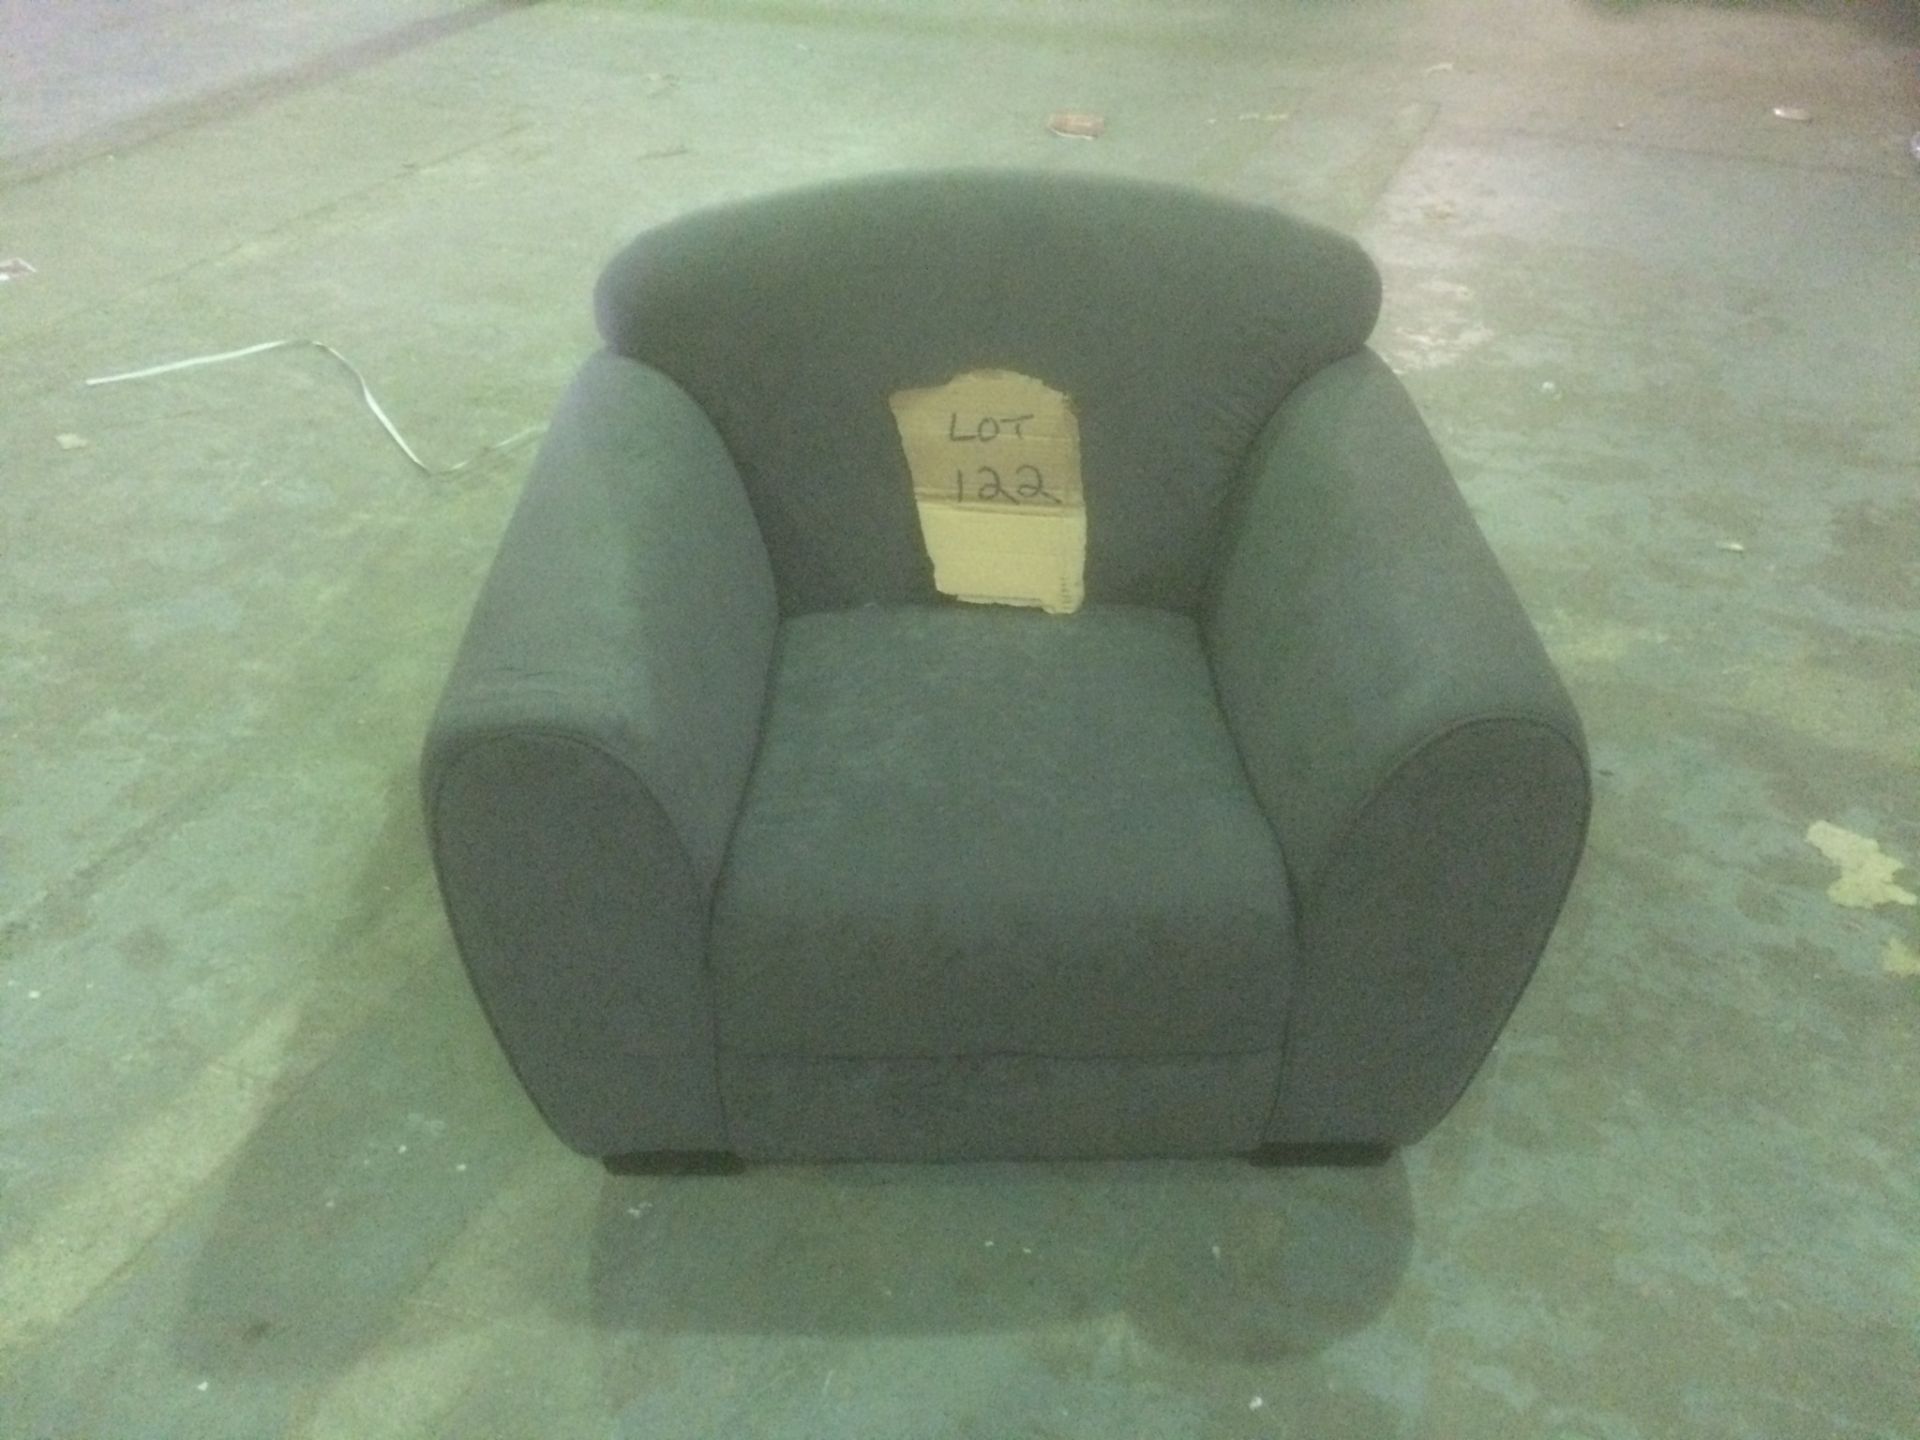 Tokyo single modern design arm chair in grey fabric - Image 2 of 2